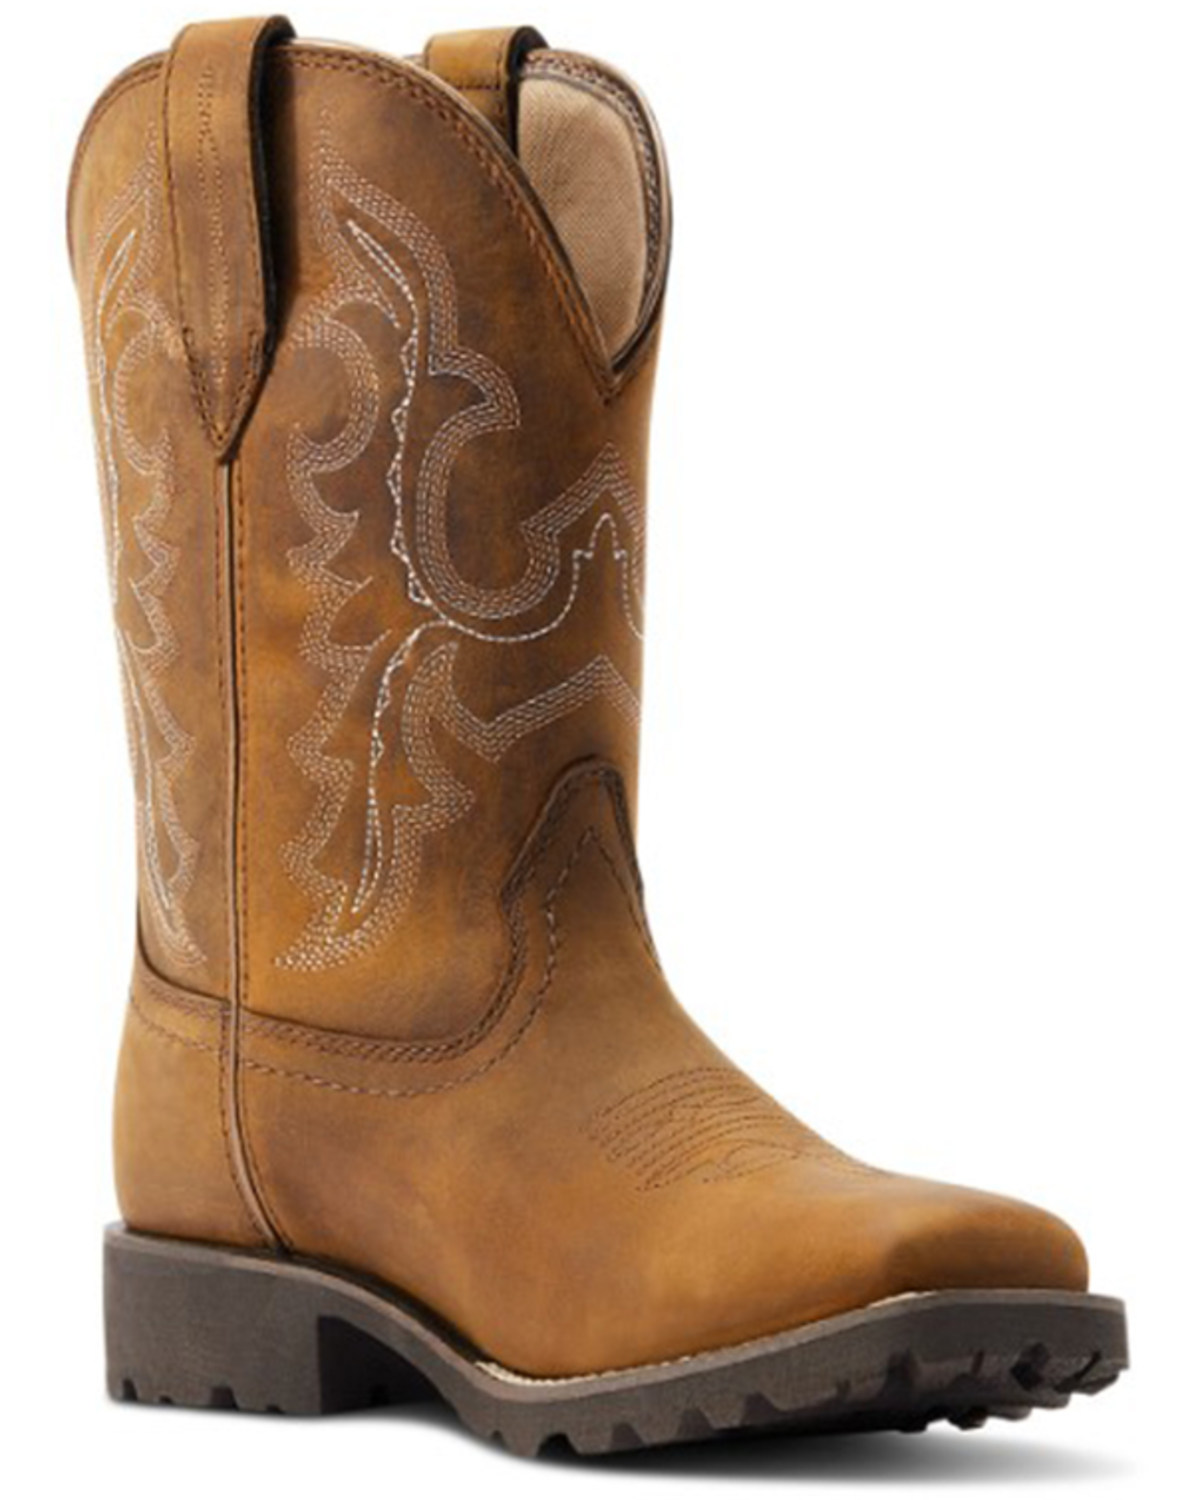 Ariat Women's Unbridled Rancher H2O Oily Distressed Western Boots - Square Toe